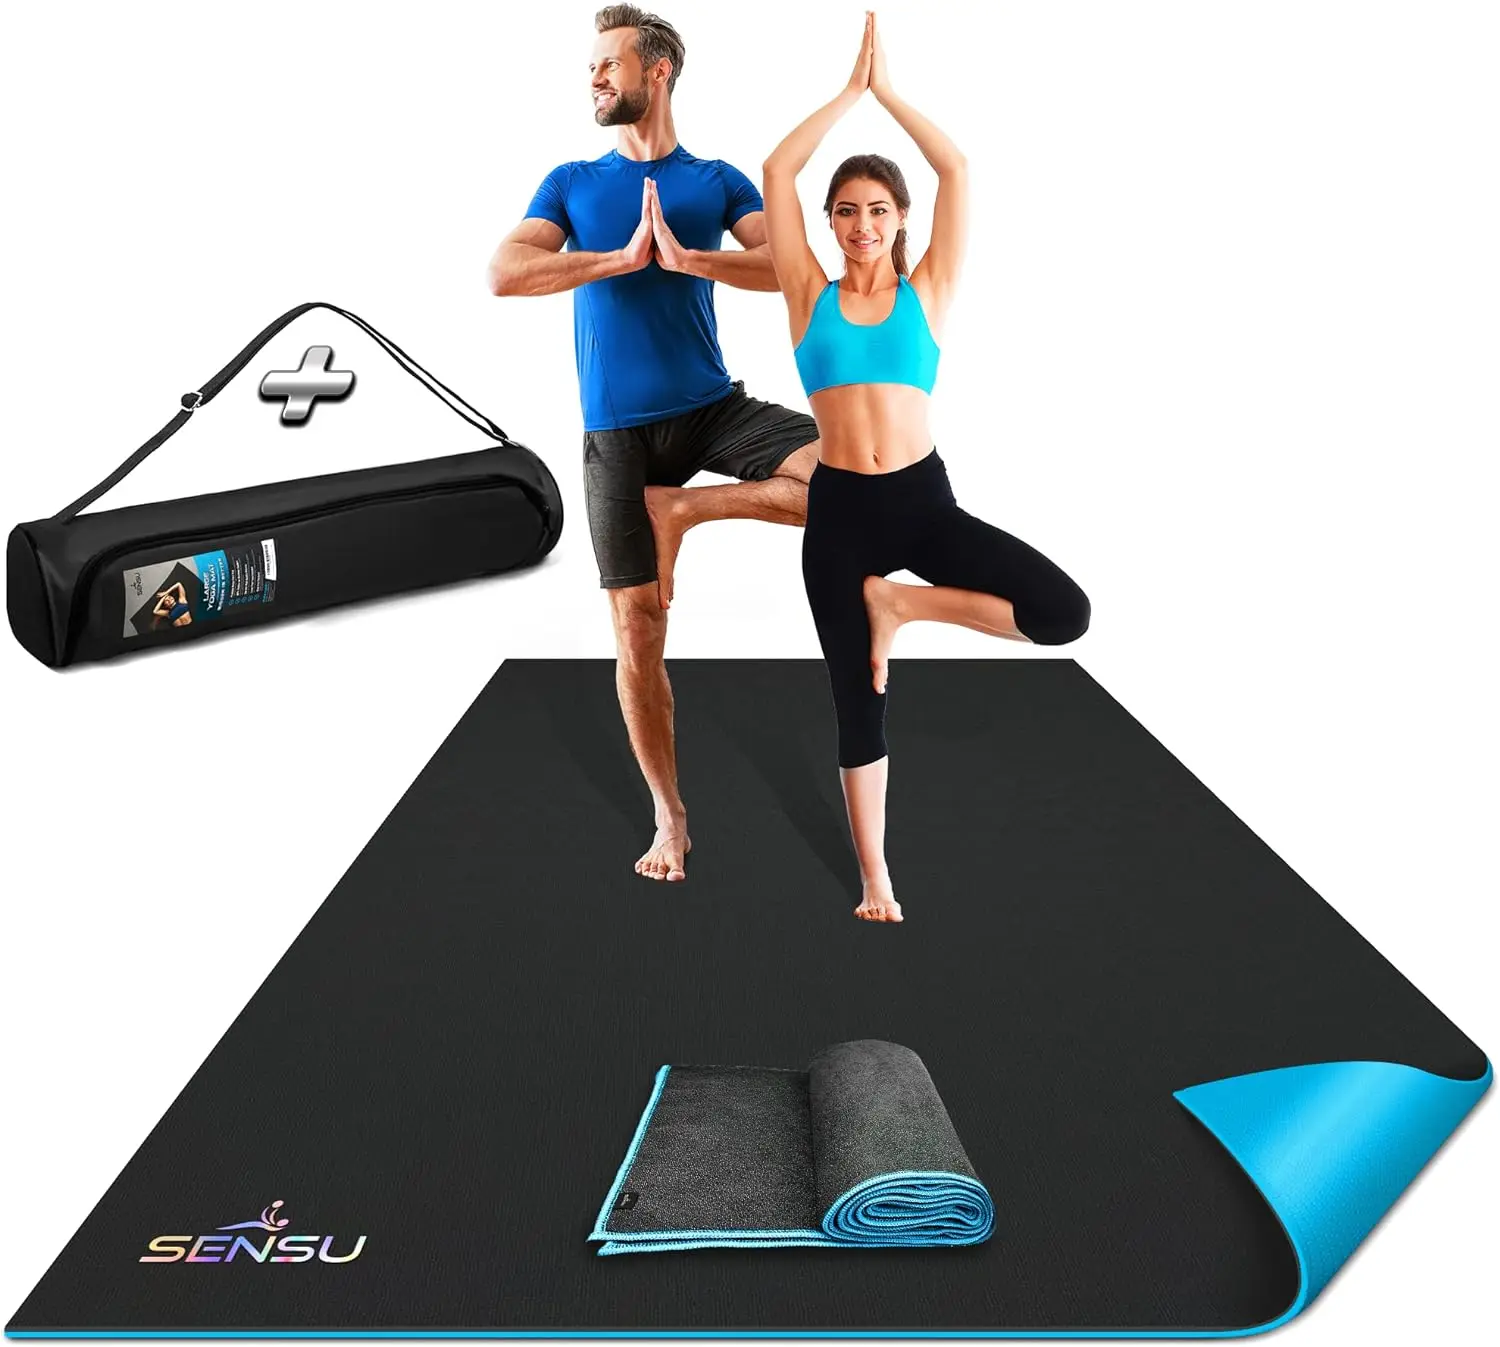 

Large Yoga Mat - 7’ x 5’ x 9mm Extra Thick Exercise Mat for Yoga, Pilates, Stretching, Cardio Home Gym Floor, Non- Slip Anti Tea